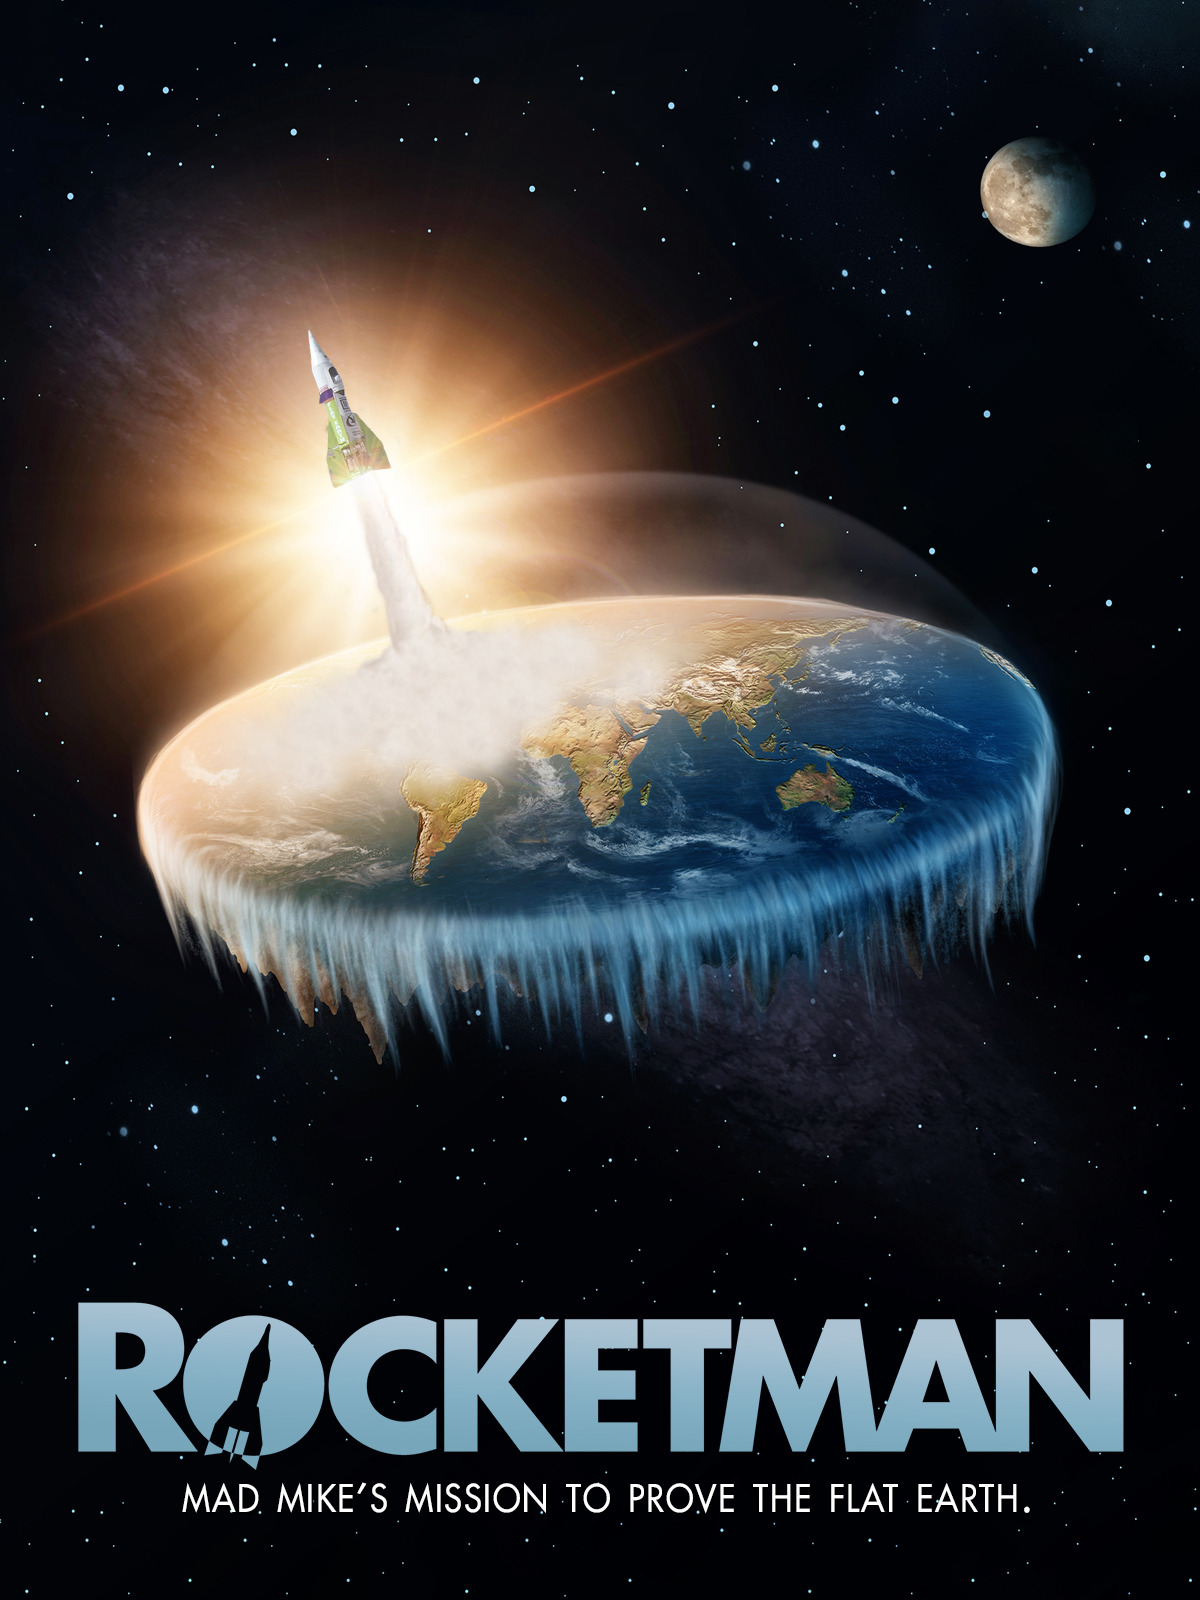 Watch Rocketman: Mad Mike's Mission to Prove the Flat Earth | Prime Video